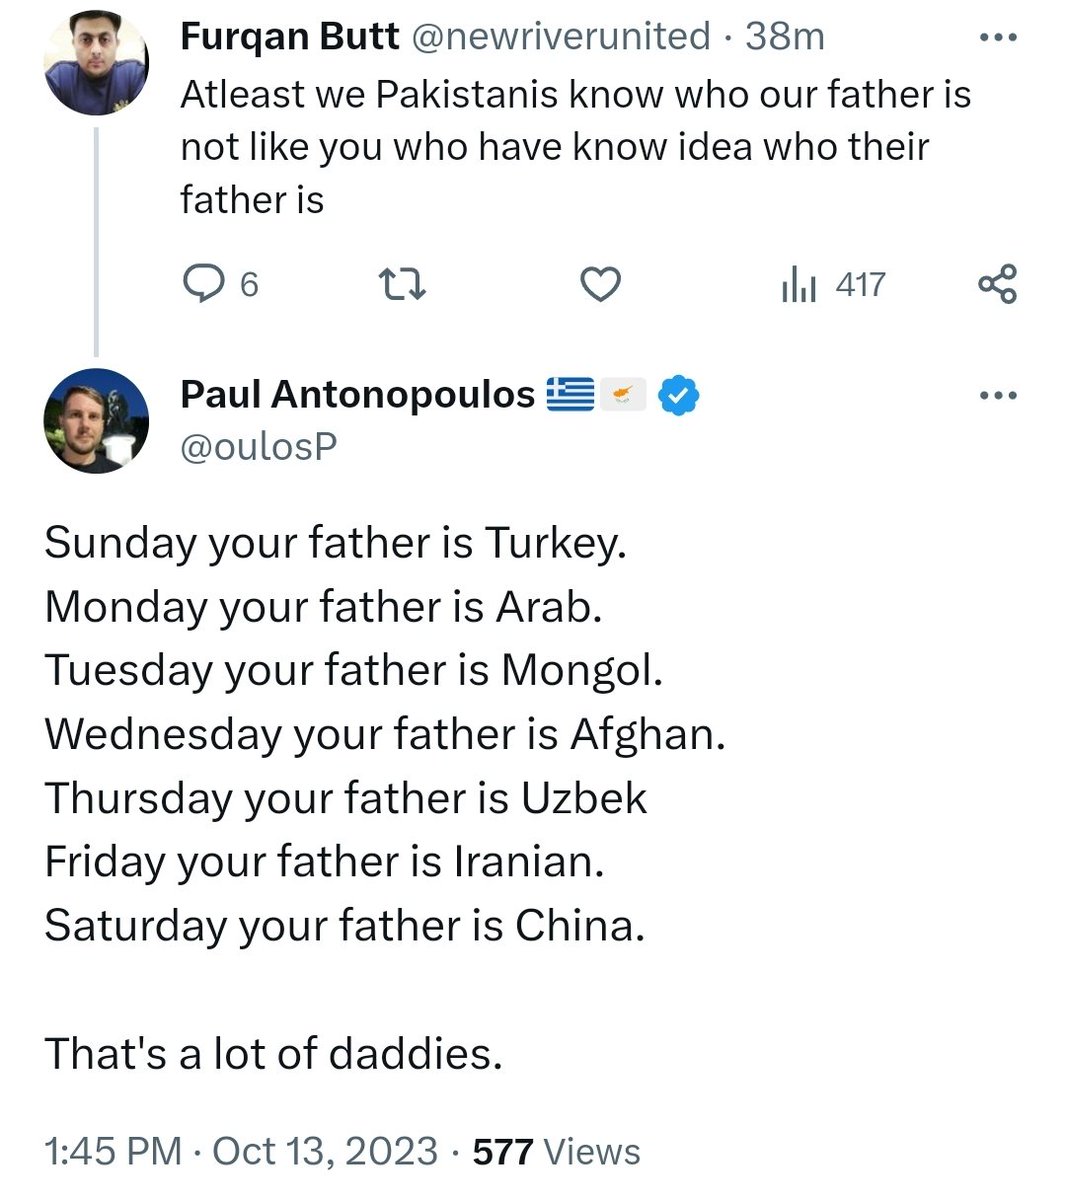 This is Paul spanking the butt of Furqan 😭😭